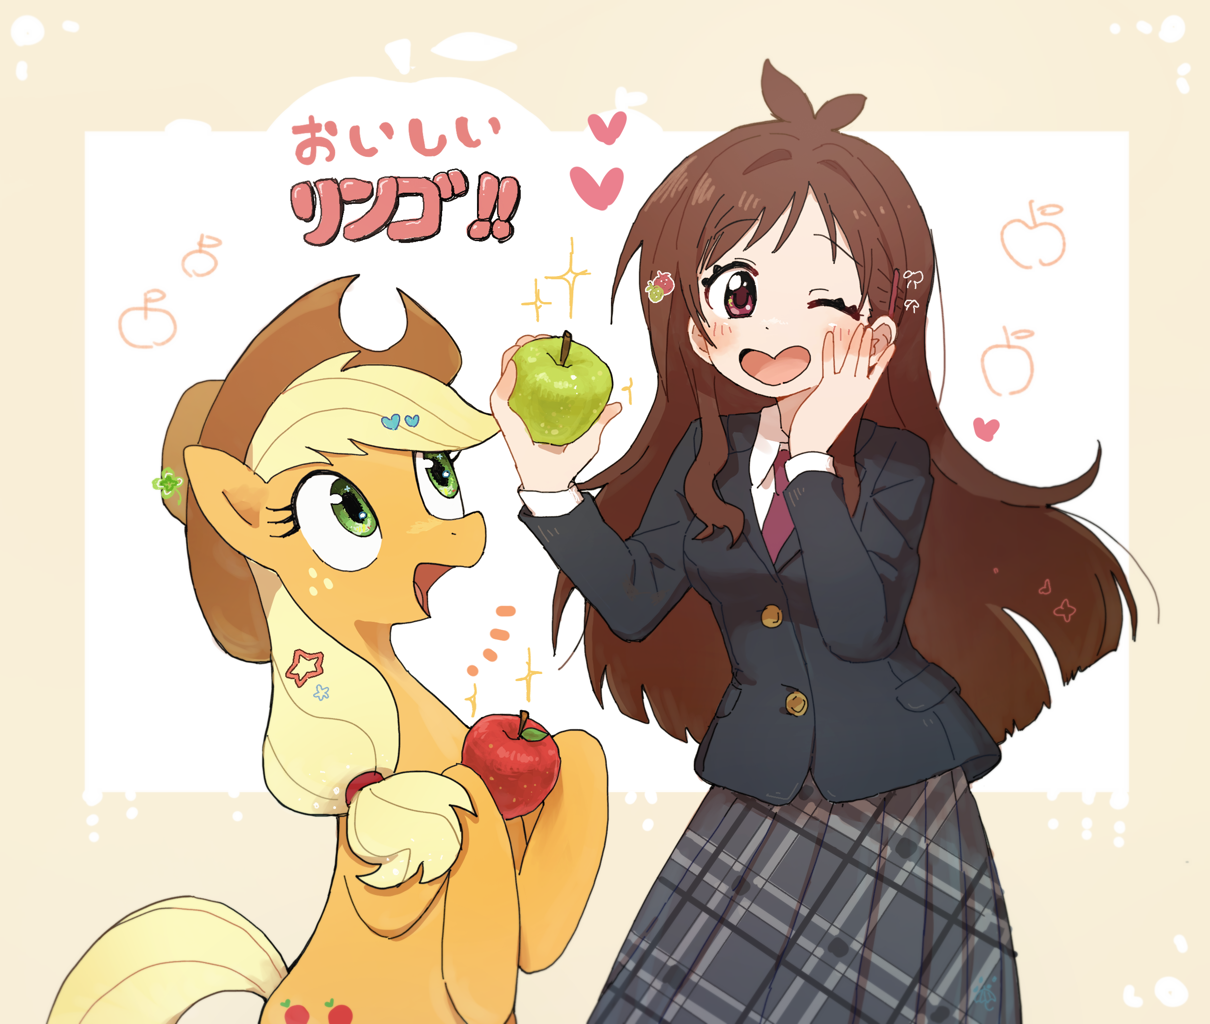 [anime,apple,applejack,applejack's hat,clothes,cowboy hat,crossover,duo,earth pony,female,food,hat,heart,human,japanese,mare,open mouth,pony,safe,skirt,wink,idolmaster,one eye closed,duo female,translated in the description,smiling,emanata,hand on face,akari tsujino,artist:fuyugi]